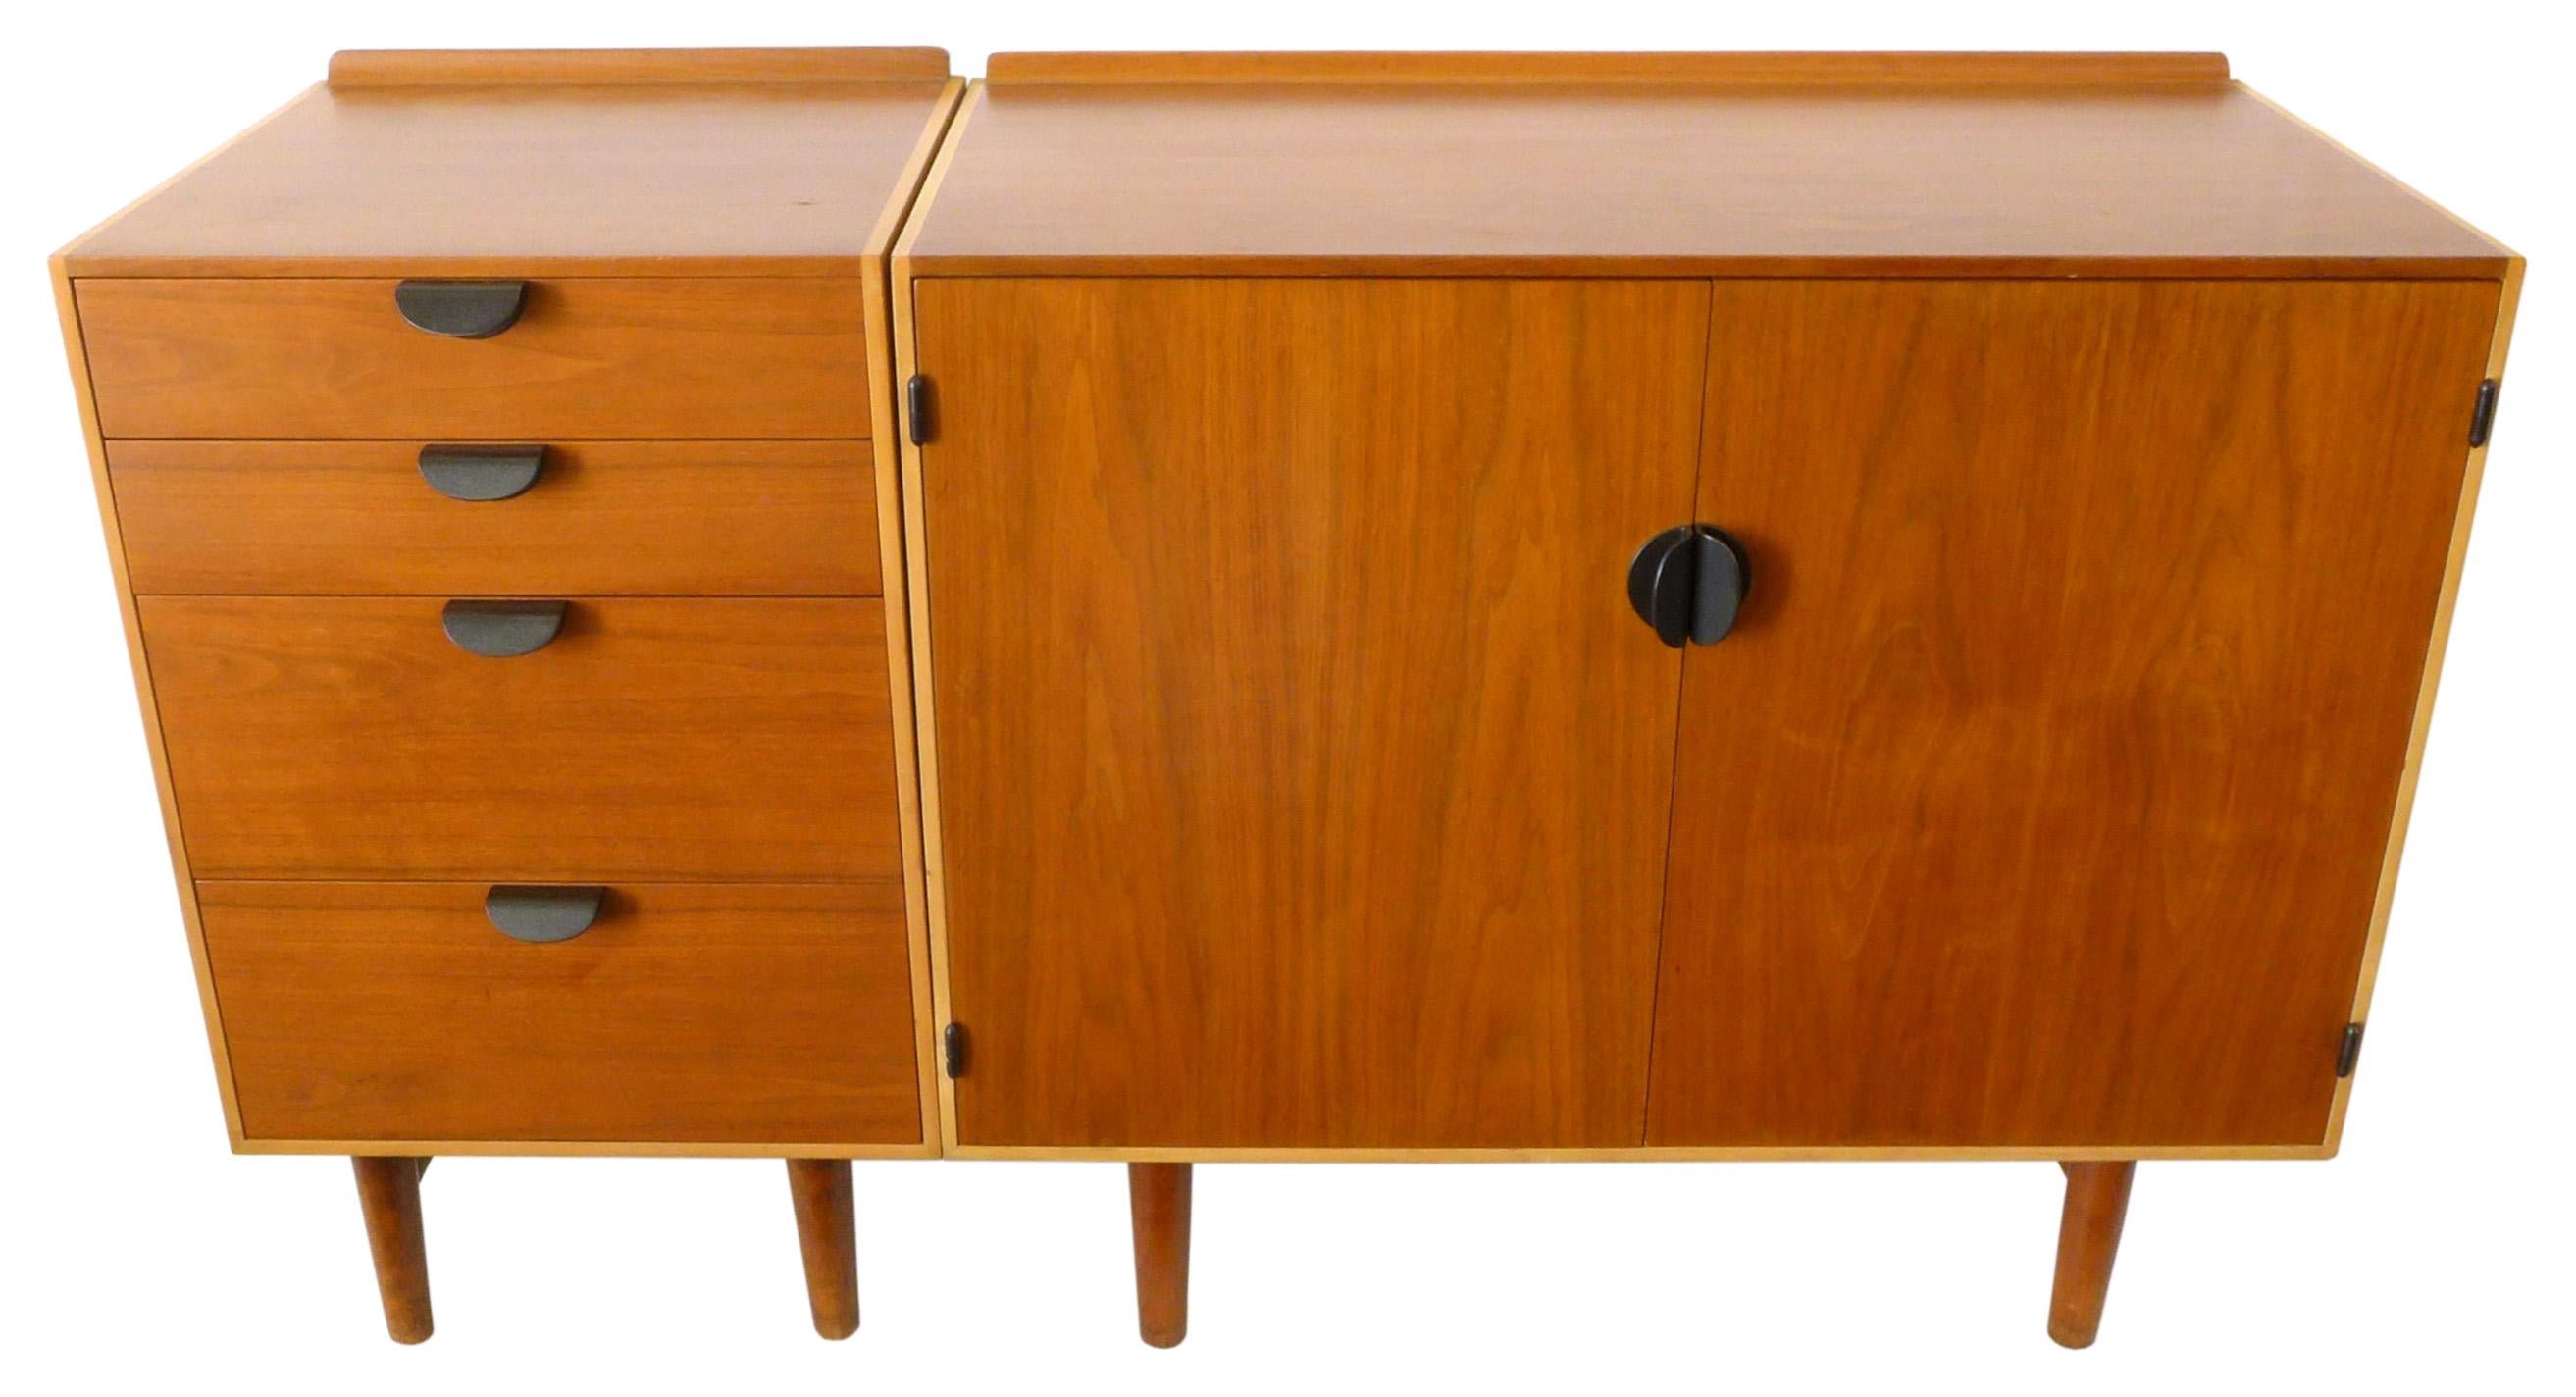 A handsome pair of Mid-Century Cabinets by Finn Juhl for Baker. Classic Danish modern style, quality and materials; two beech and teak cabinets with bronze pulls, one unit with four drawers, the other two doors concealing two drawers and movable